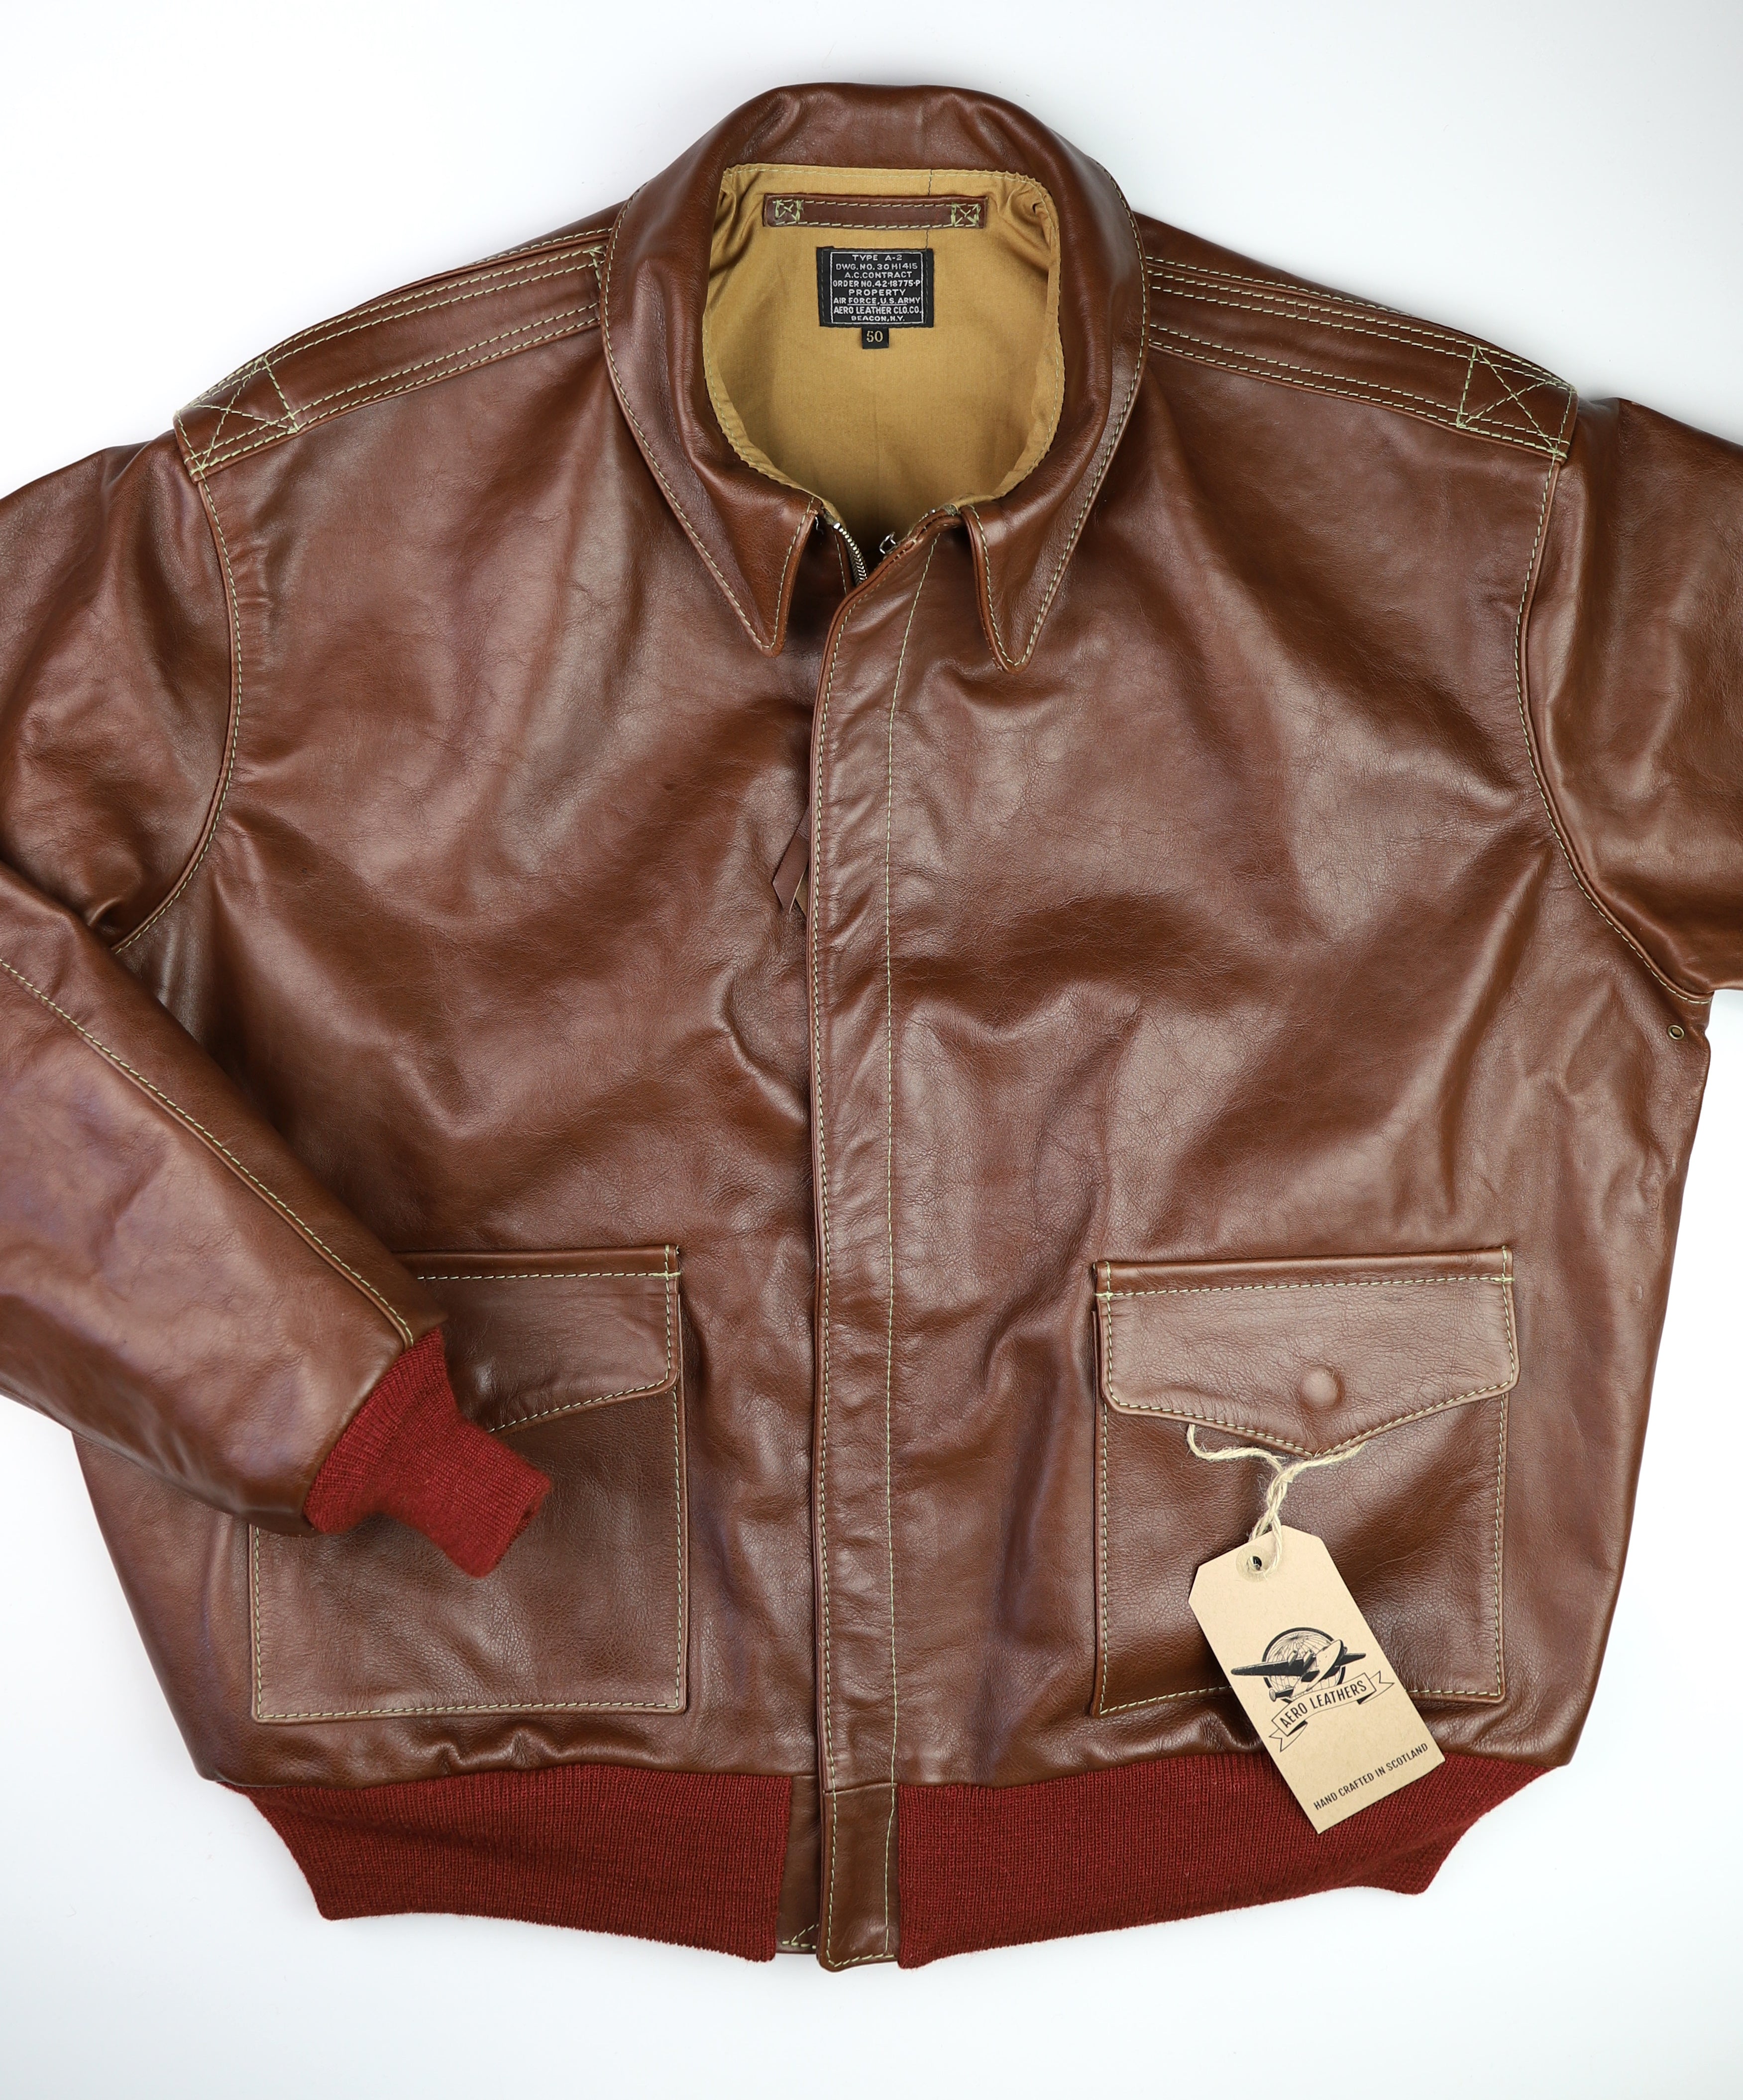 Aero A-2 Military Flight Jacket, size 50, Russet Vicenza Horsehide